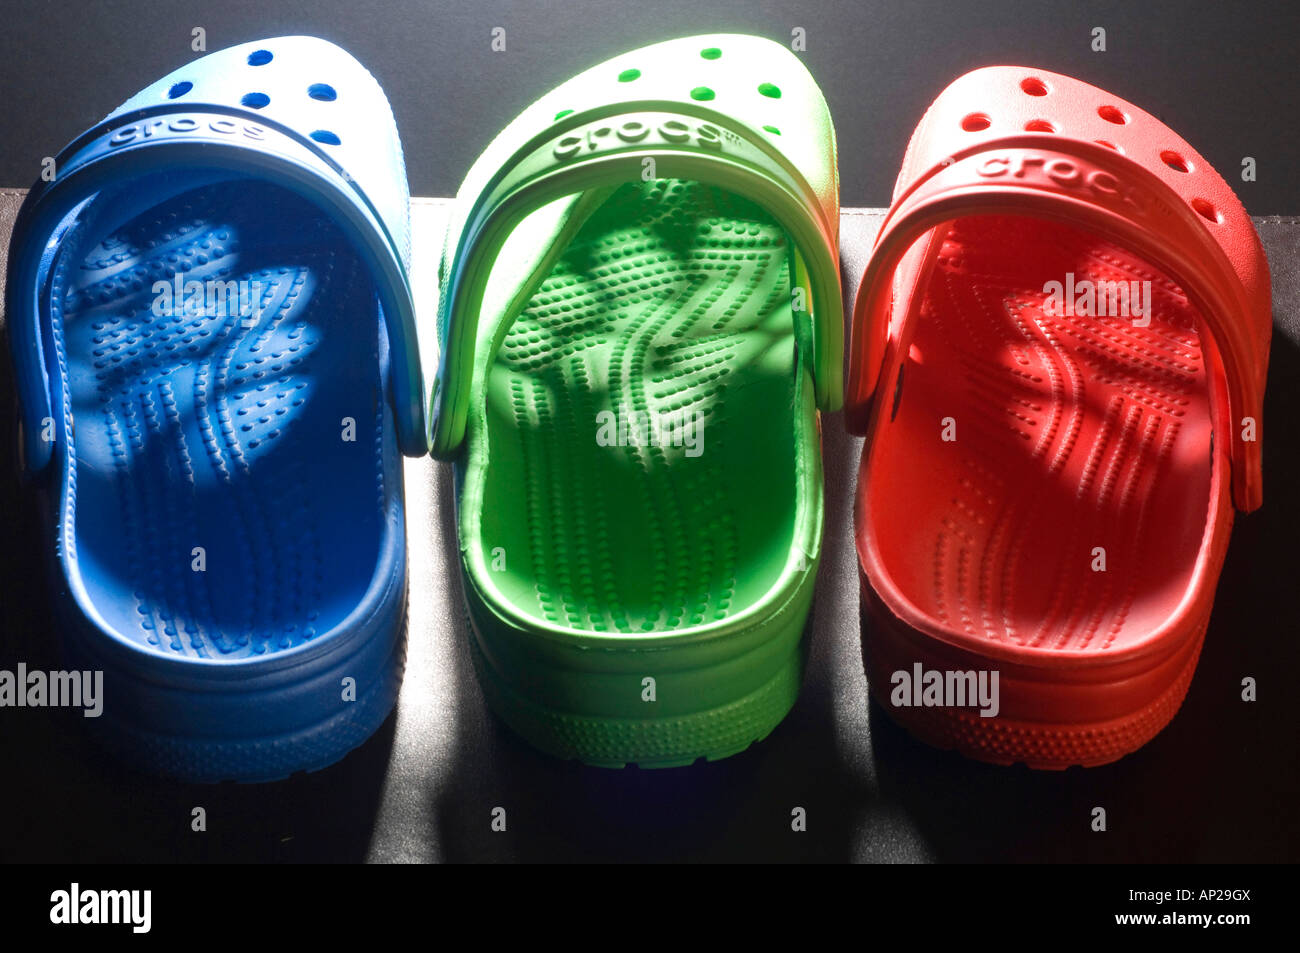 One blue one green one red Croc leisure shoes lined up in a row with light shining through the pattern of holes in the uppers Stock Photo